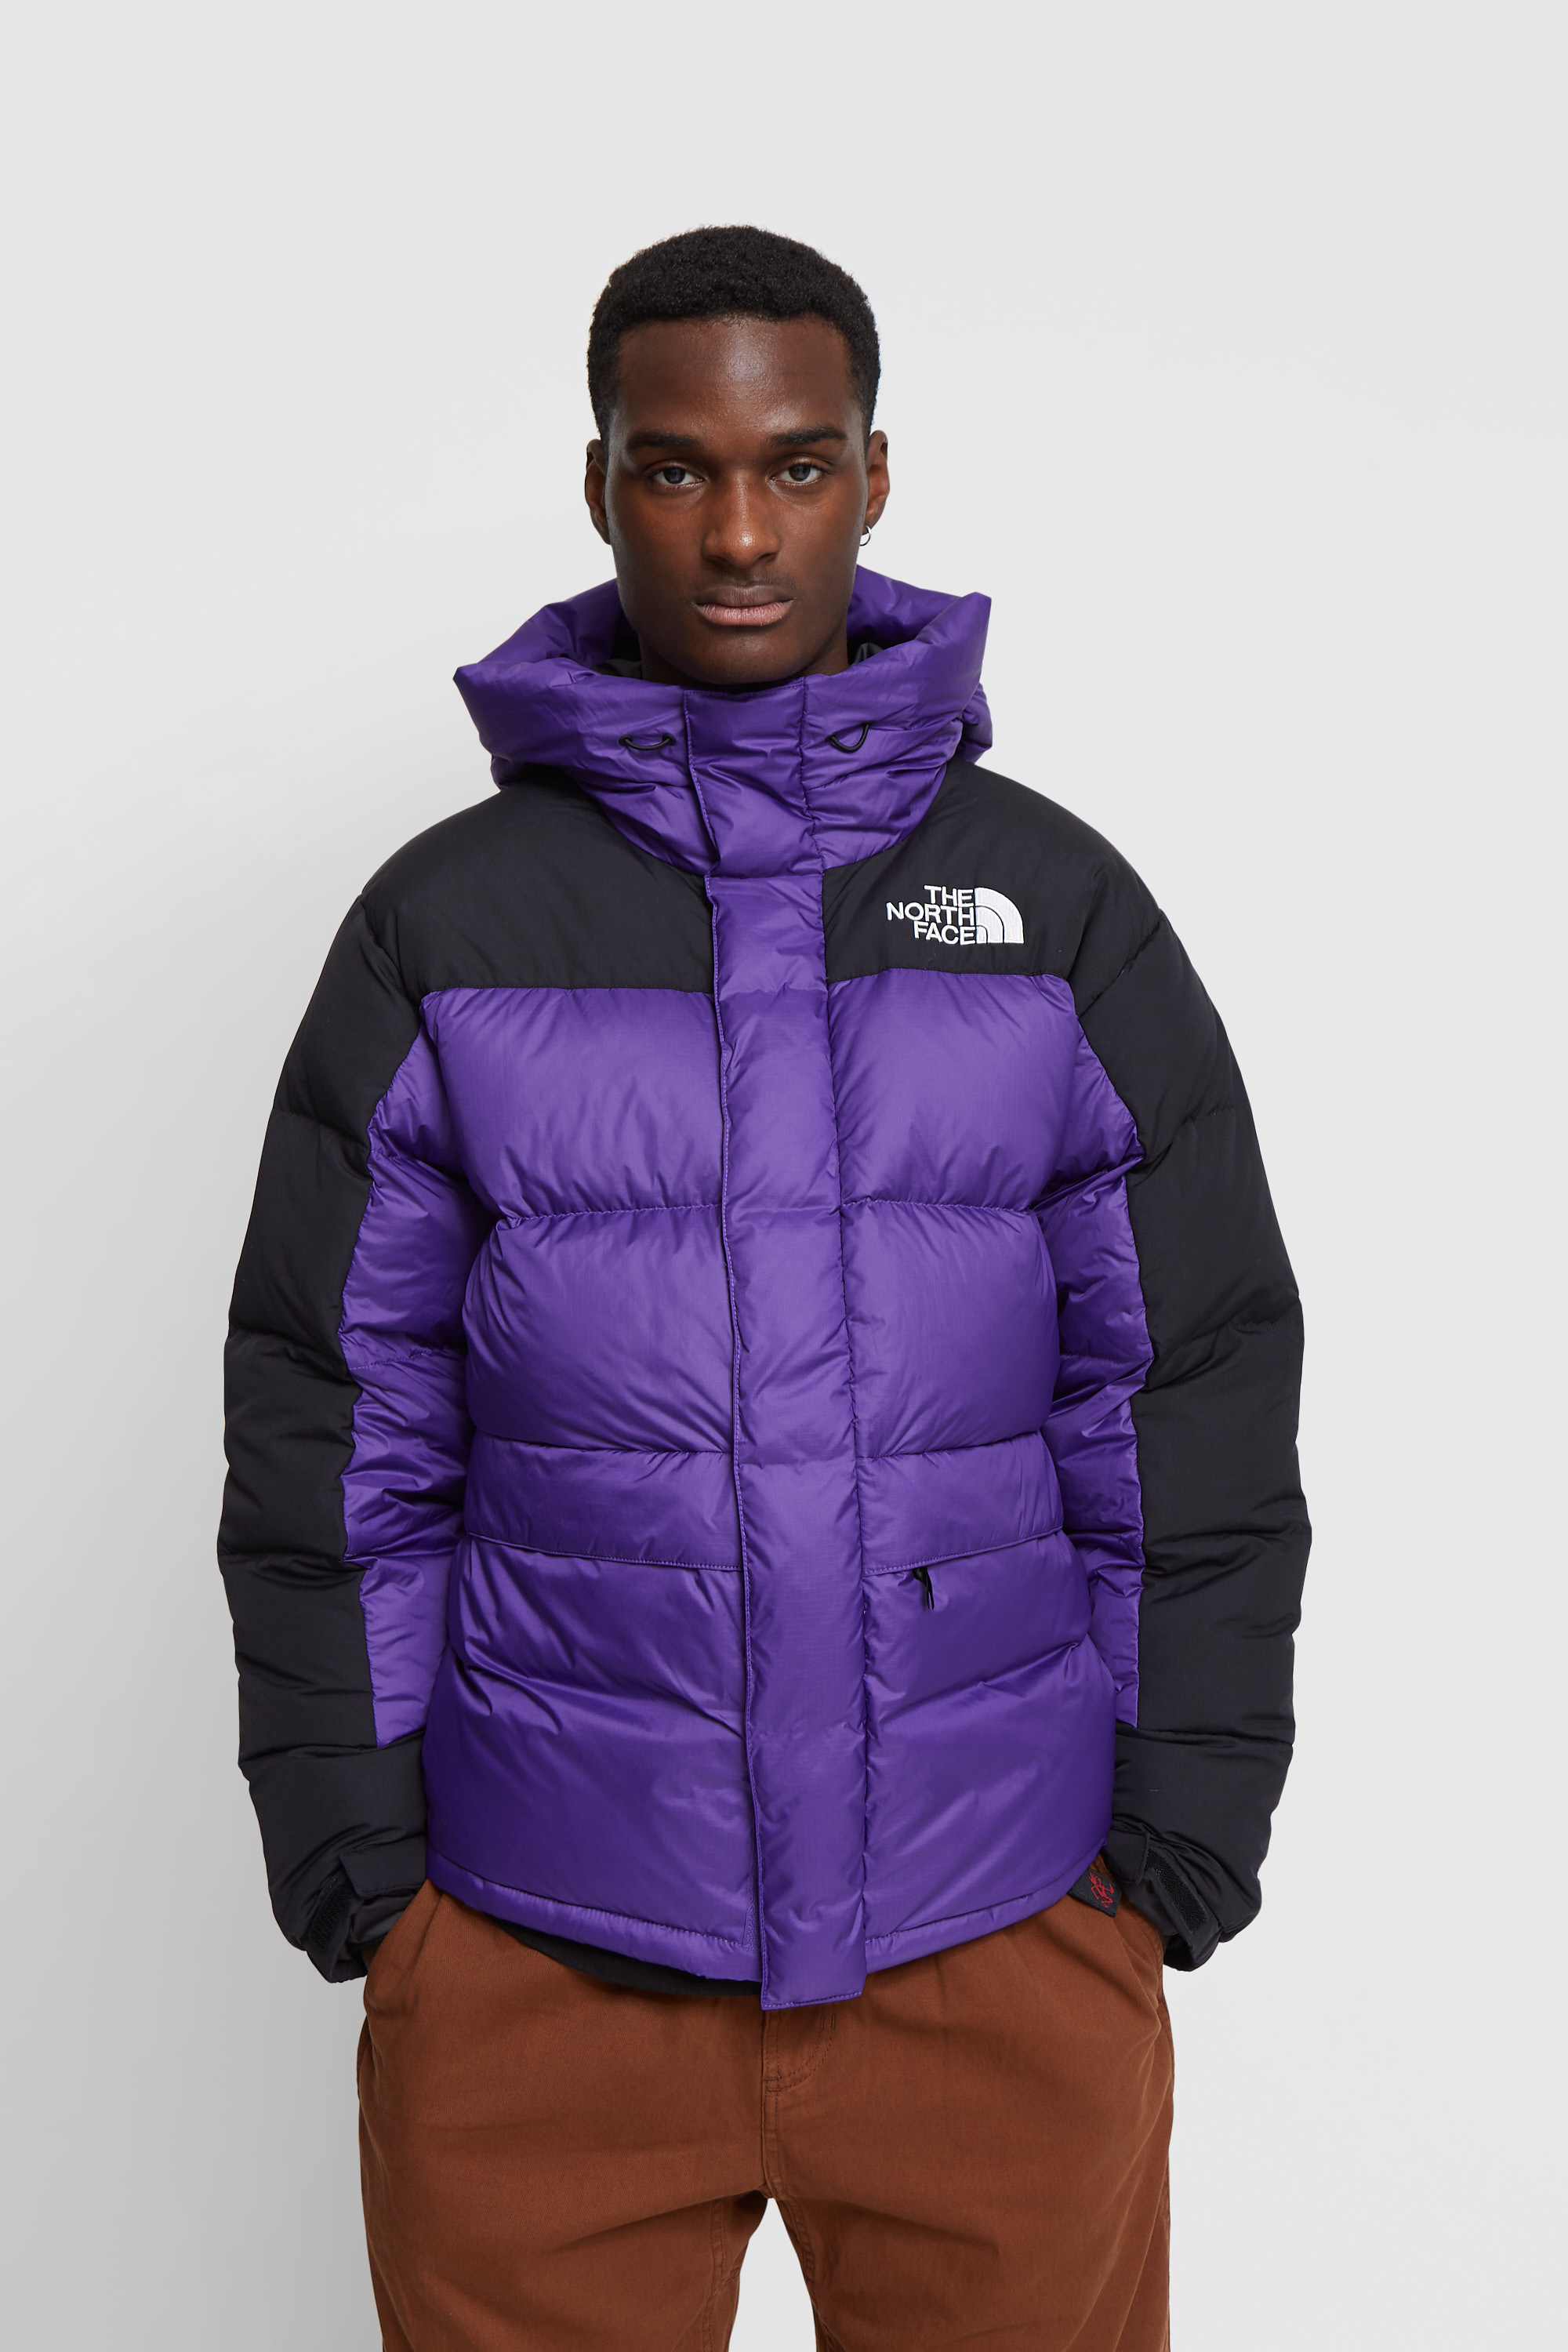 The North Face Down Jacket Deals, 50% OFF | www.ilpungolo.org